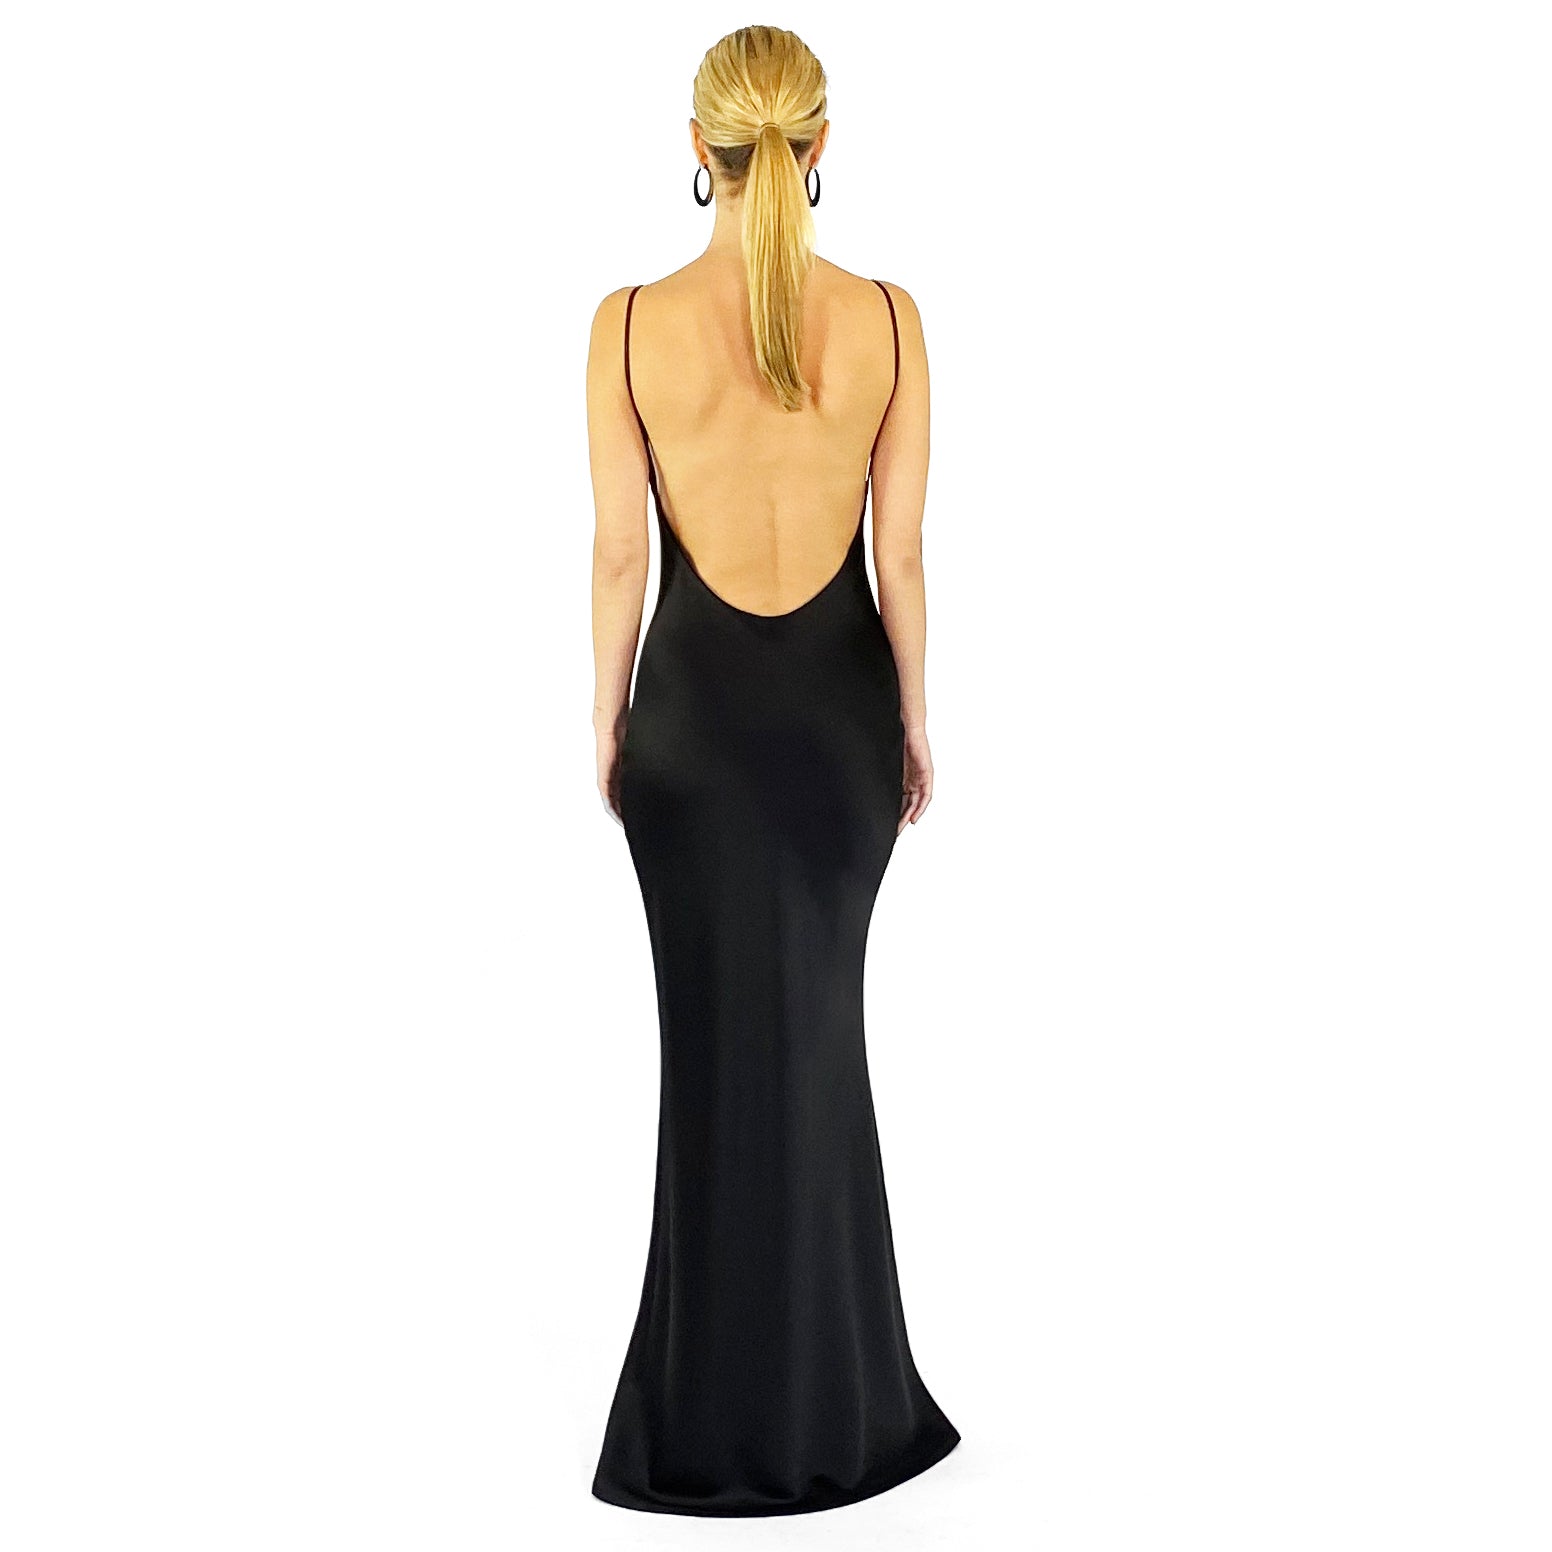 The Madysyn Backless Slip Gown